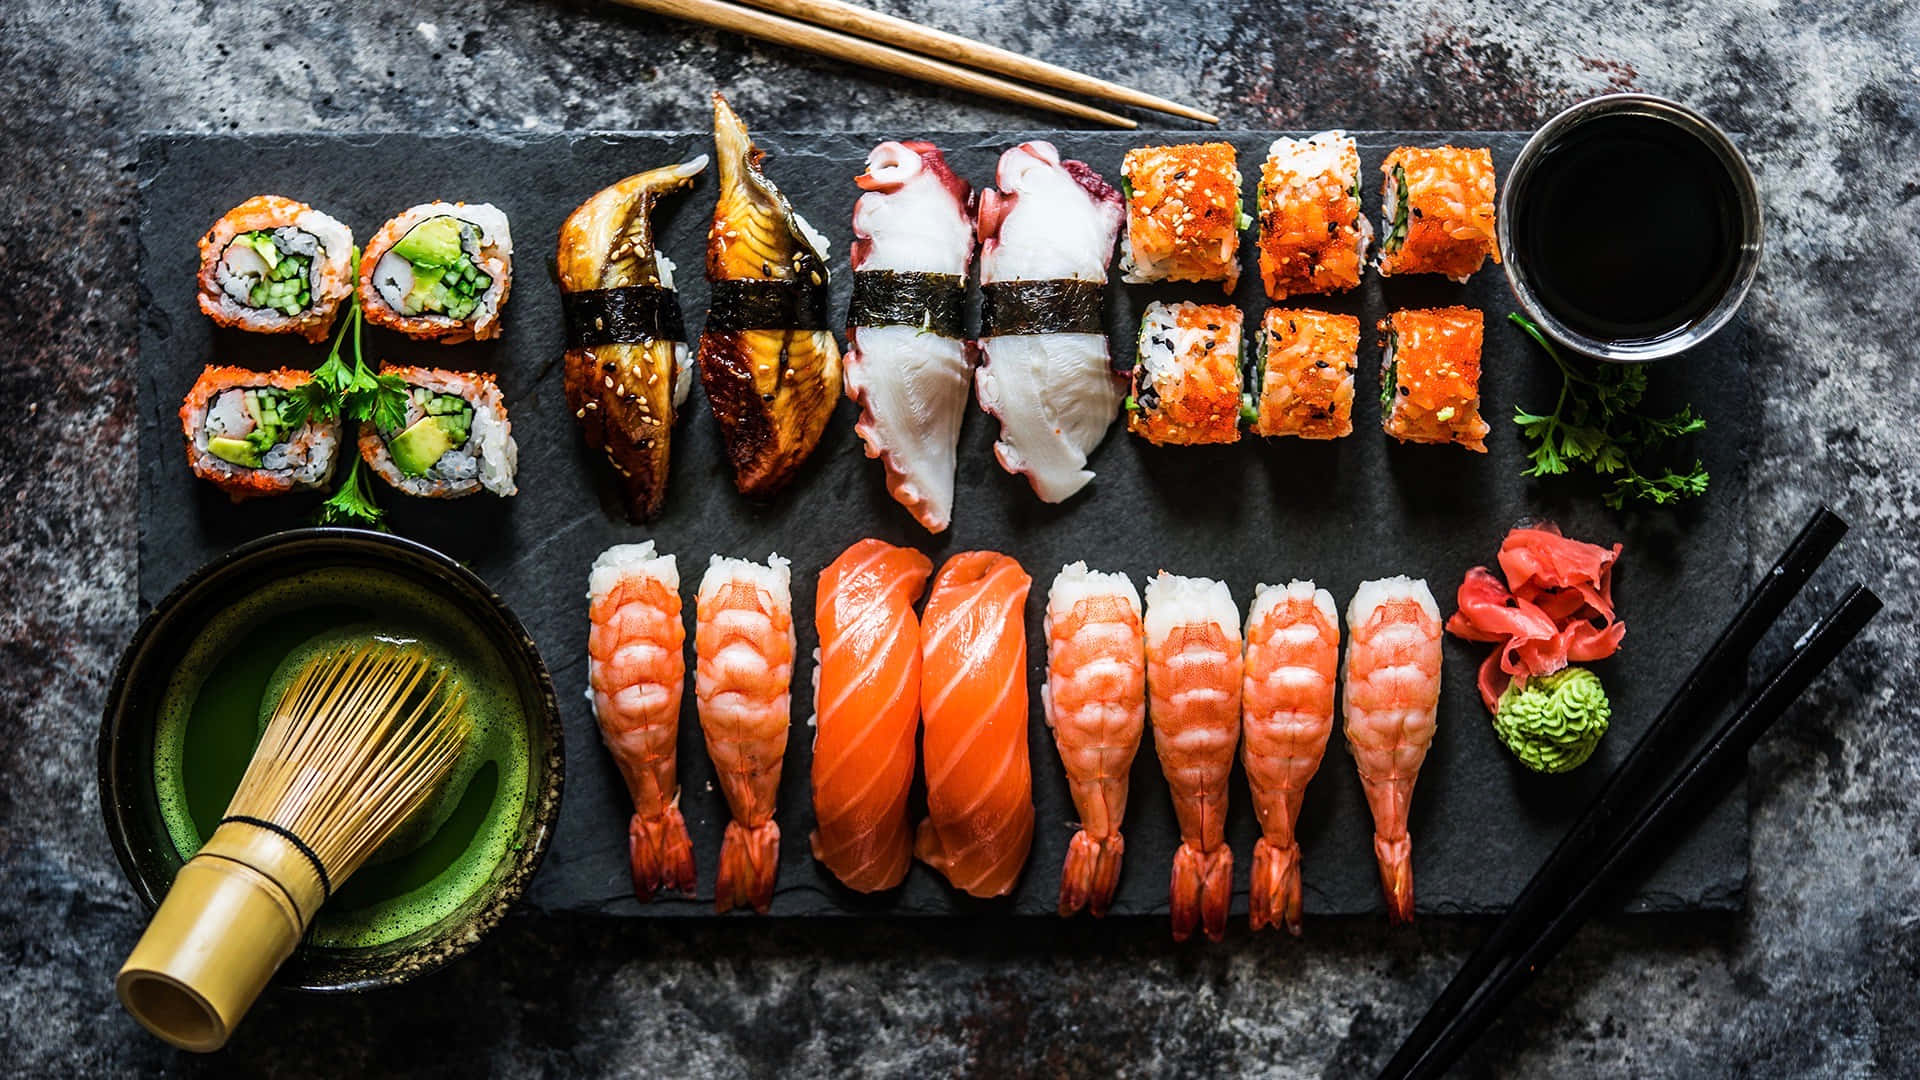 Sushi Commercial Food Photography Wallpaper